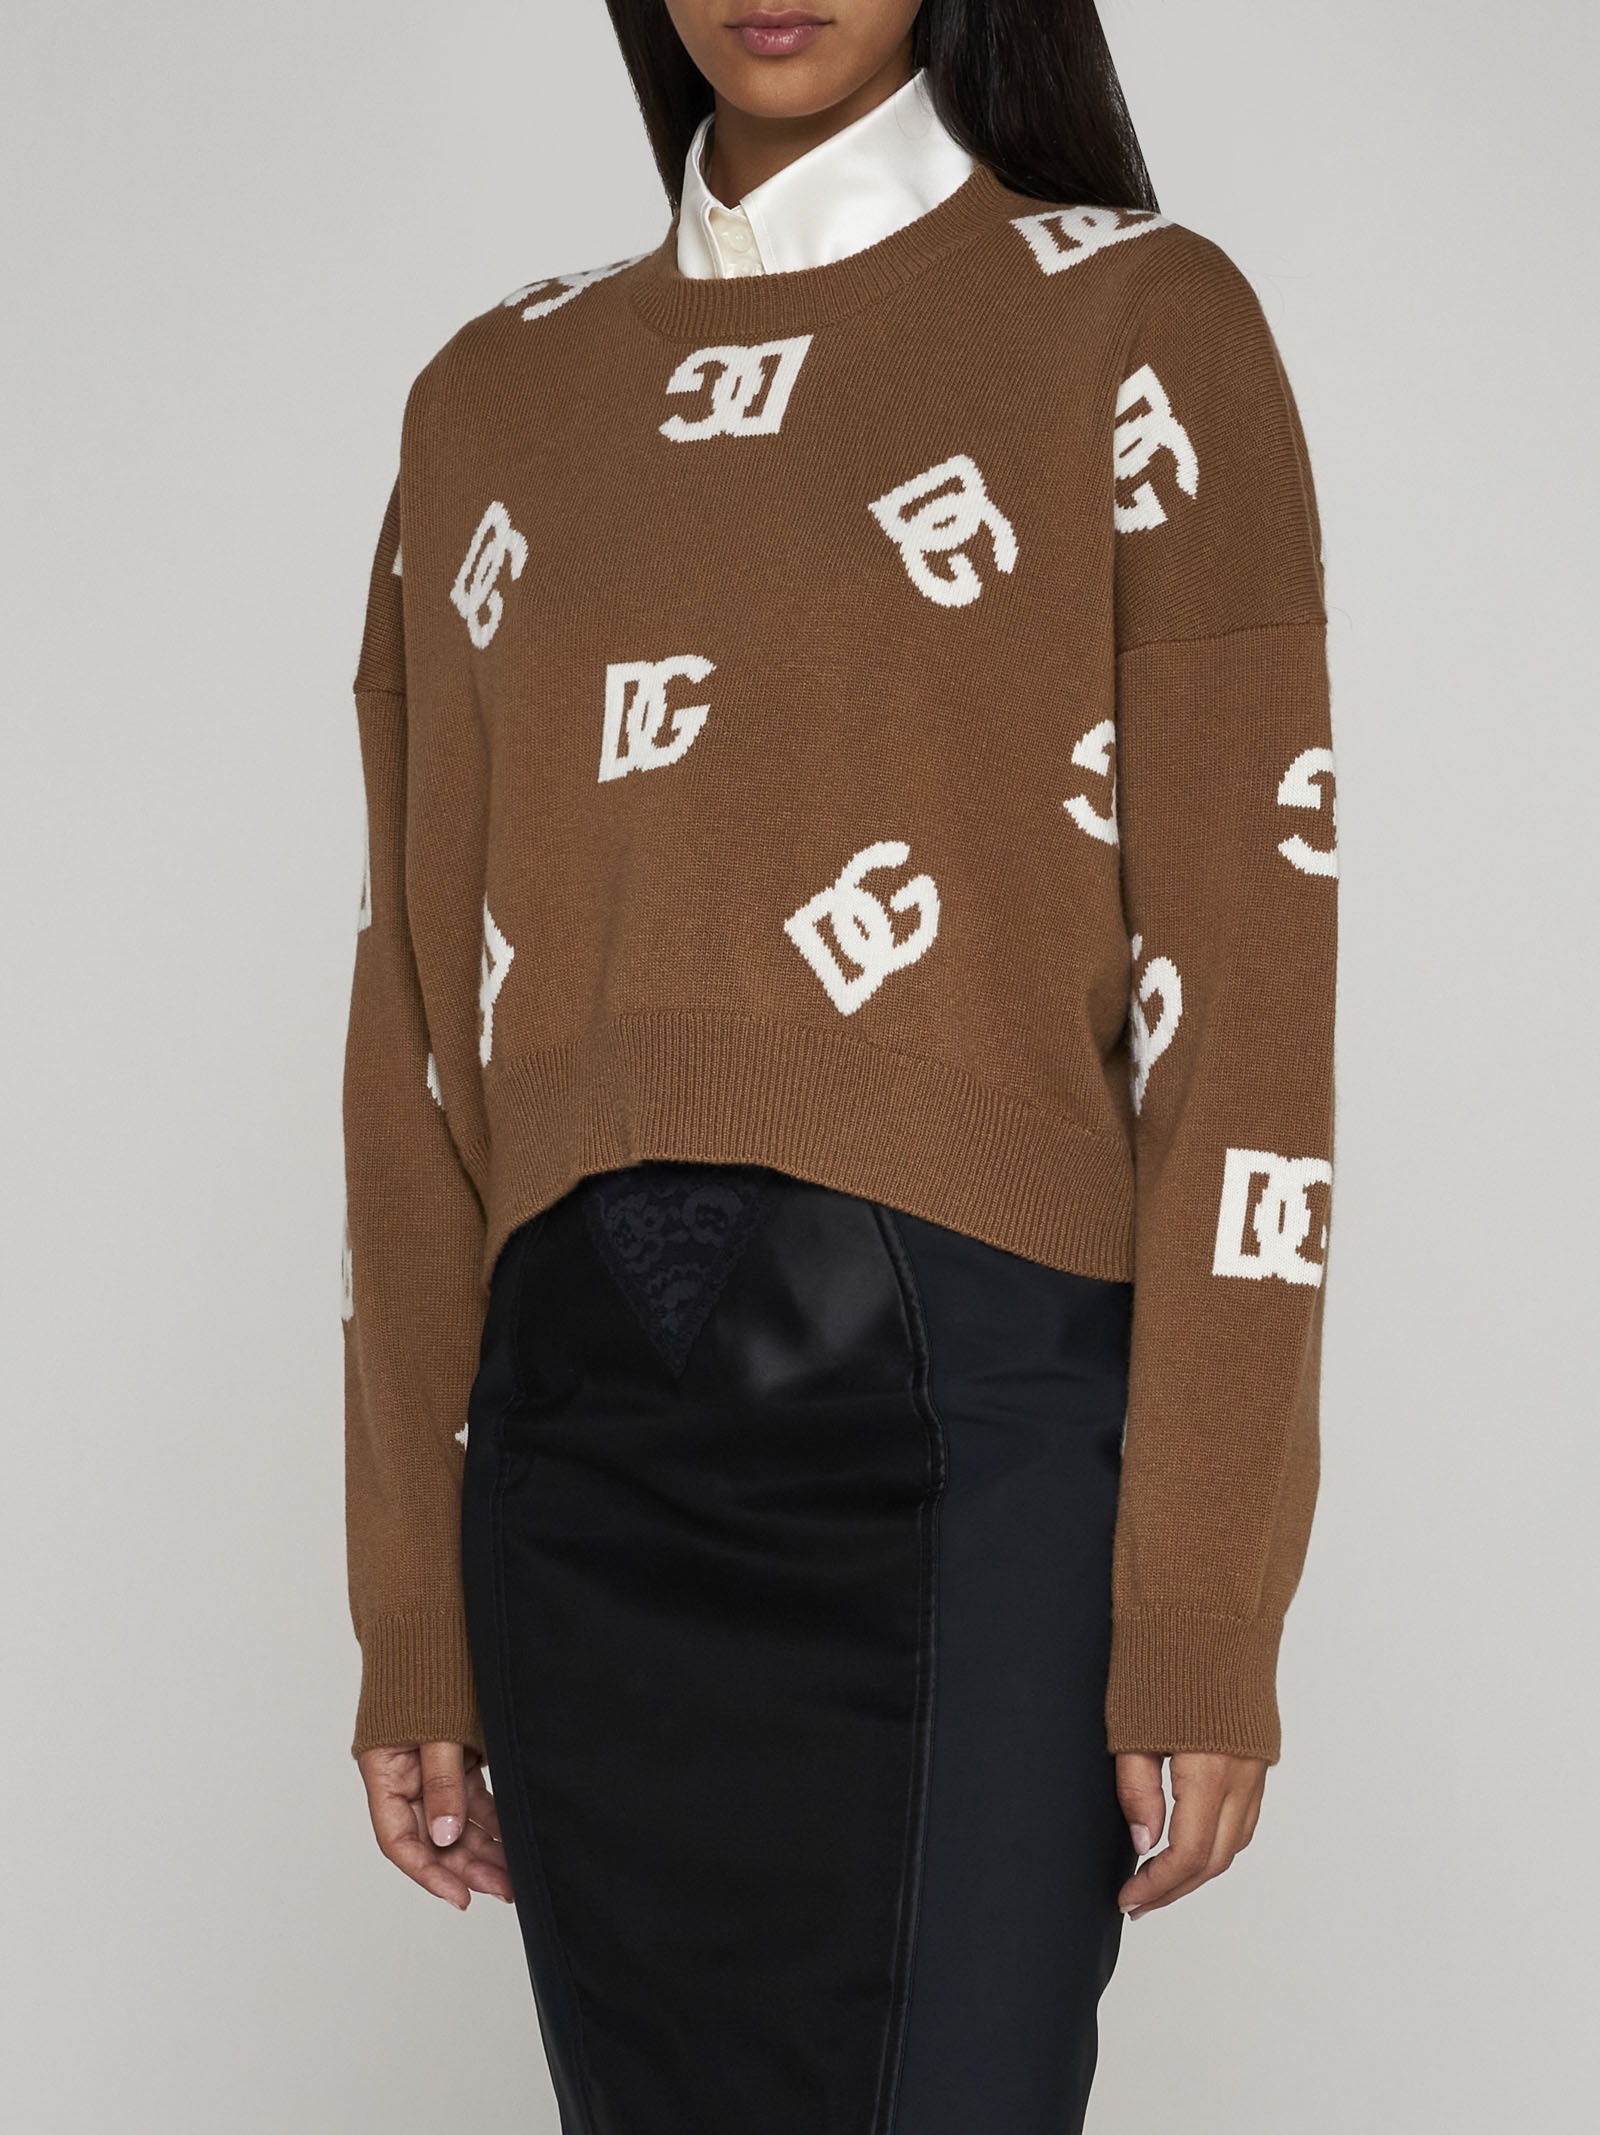 Dolce & Gabbana Cropped Wool Sweater with DG Inlay - 42